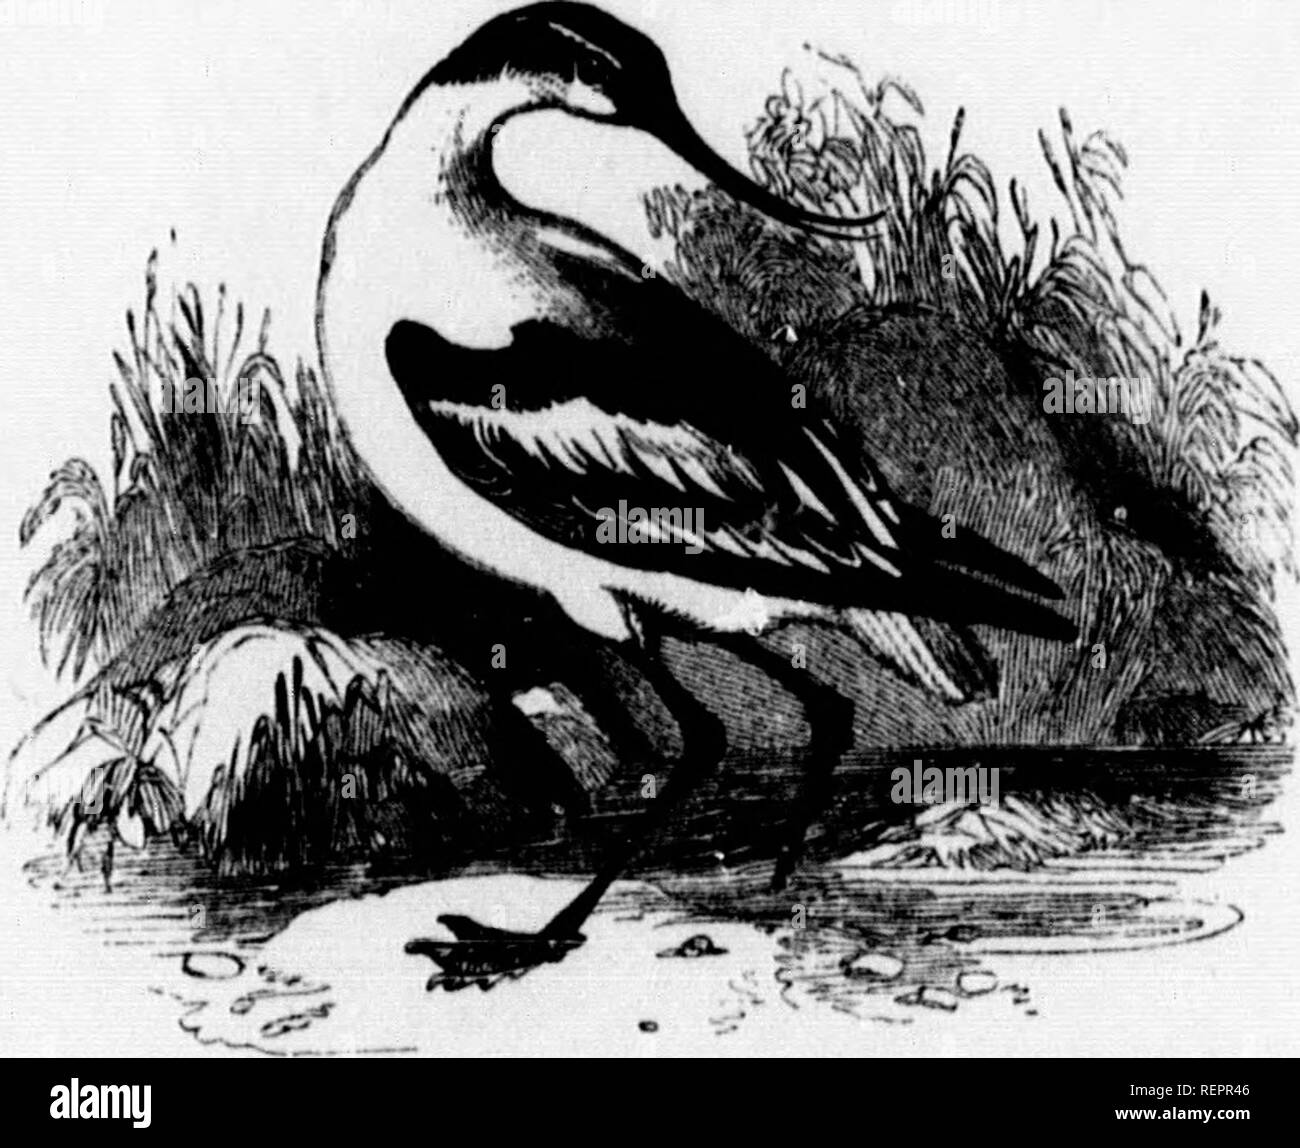 . The illustrated natural history [microform]. Natural history; Sciences naturelles. Tof, a Woodcock. VVood- im; opvts, a bird.) urlew. md in the northern »rcad over the whole le polar regions. In luddy shores of the penetrate in Hearch d, and difficult to I, collected under the itains four greenish length of the bird NATURAL HISTORY. Sub-family c, Recuniroatrinm. Recuhvikostha,—(Lat. with hill curved upwards.) 349. Avocetta, t/ie Avocet. The bill in the genus Recurvirostra is exactly the reverse of that in the genus Numenius, the curve being upwards instead -f downwards. The common Avooet is  Stock Photo